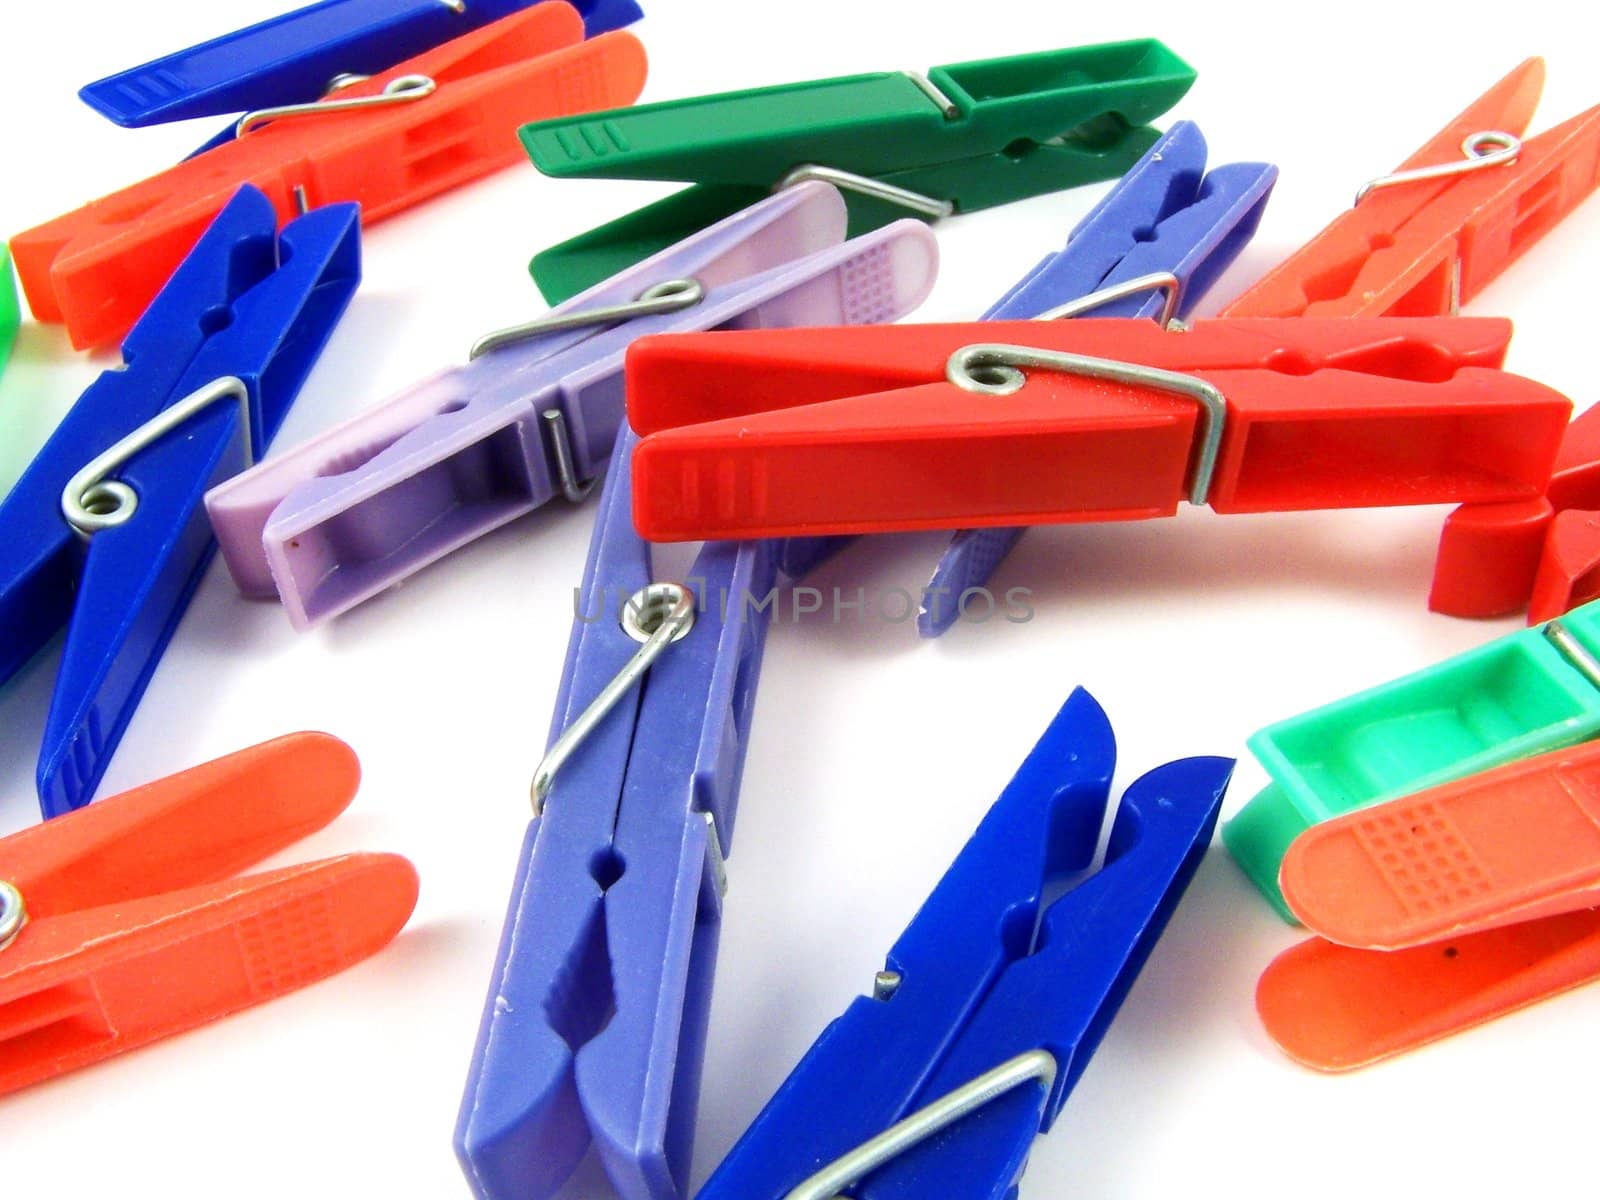 clothes pegs by alexwhite